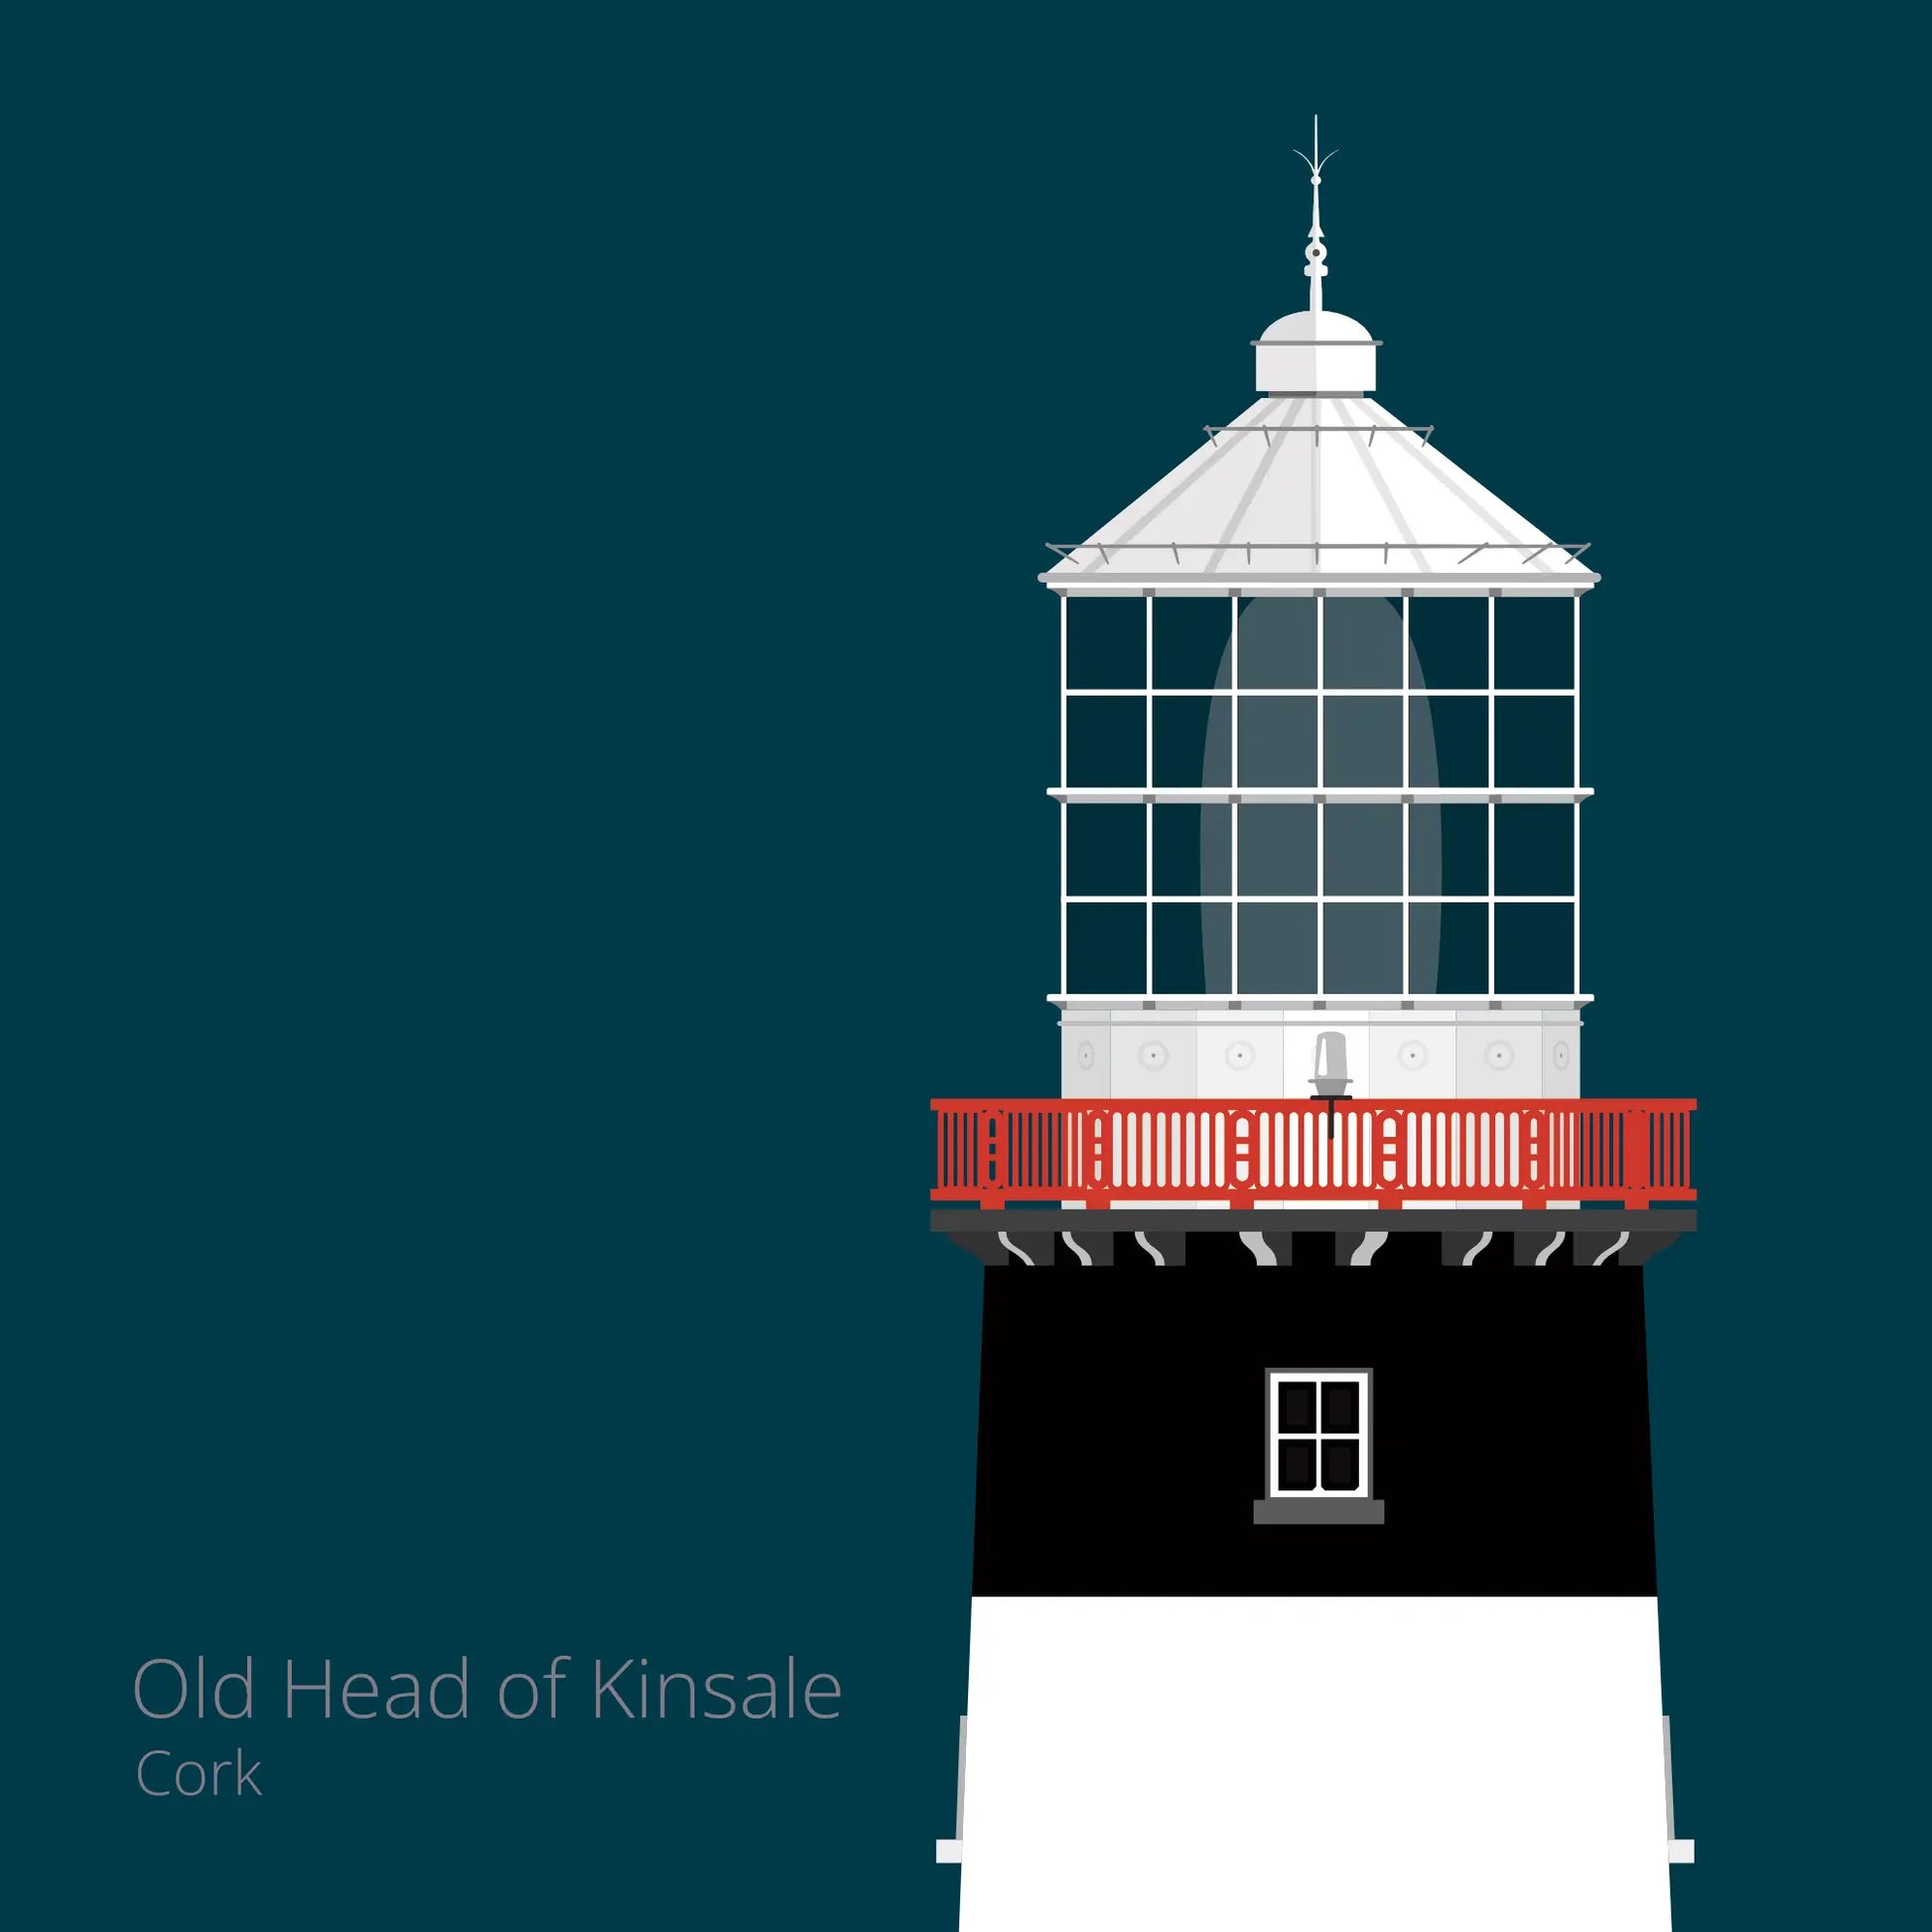 Illustration of Old Head of Kinsale lighthouse on a midnight blue background